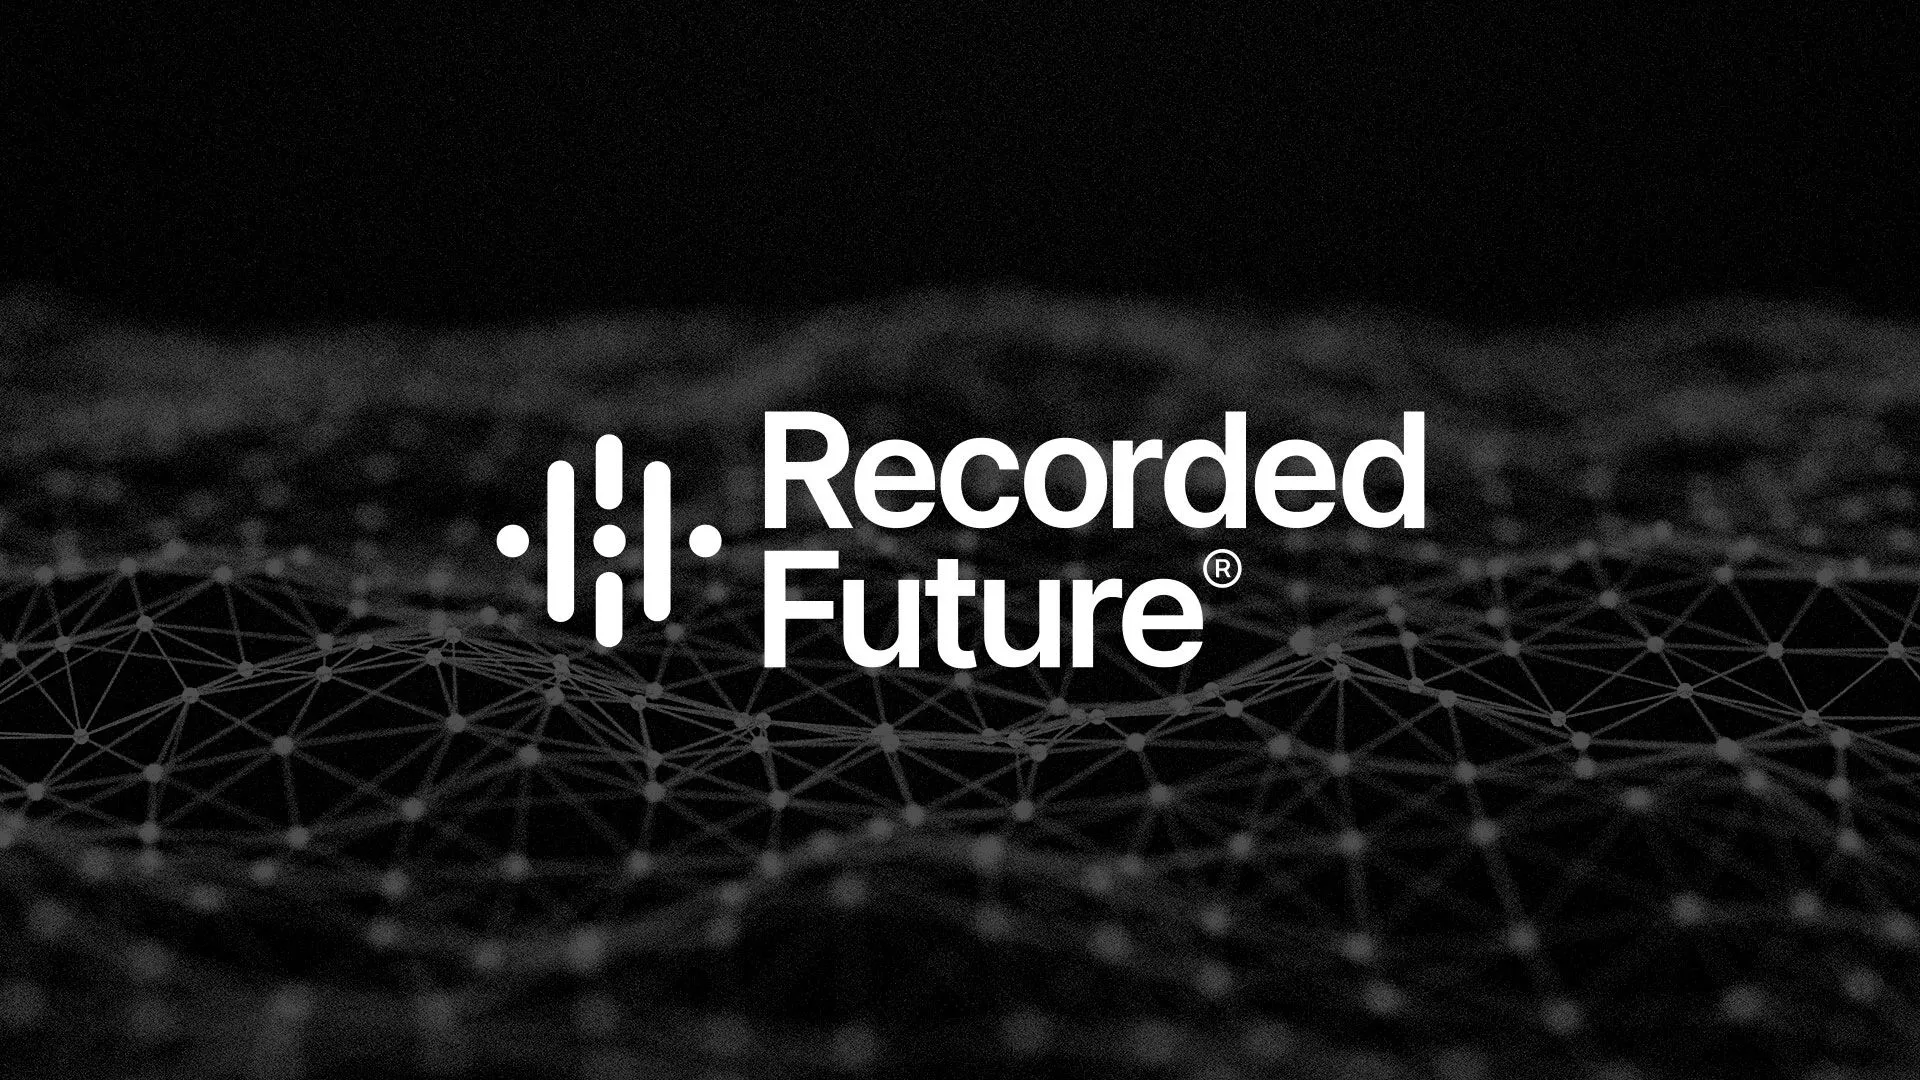 Insight Partners Acquires Recorded Future for $780 Million